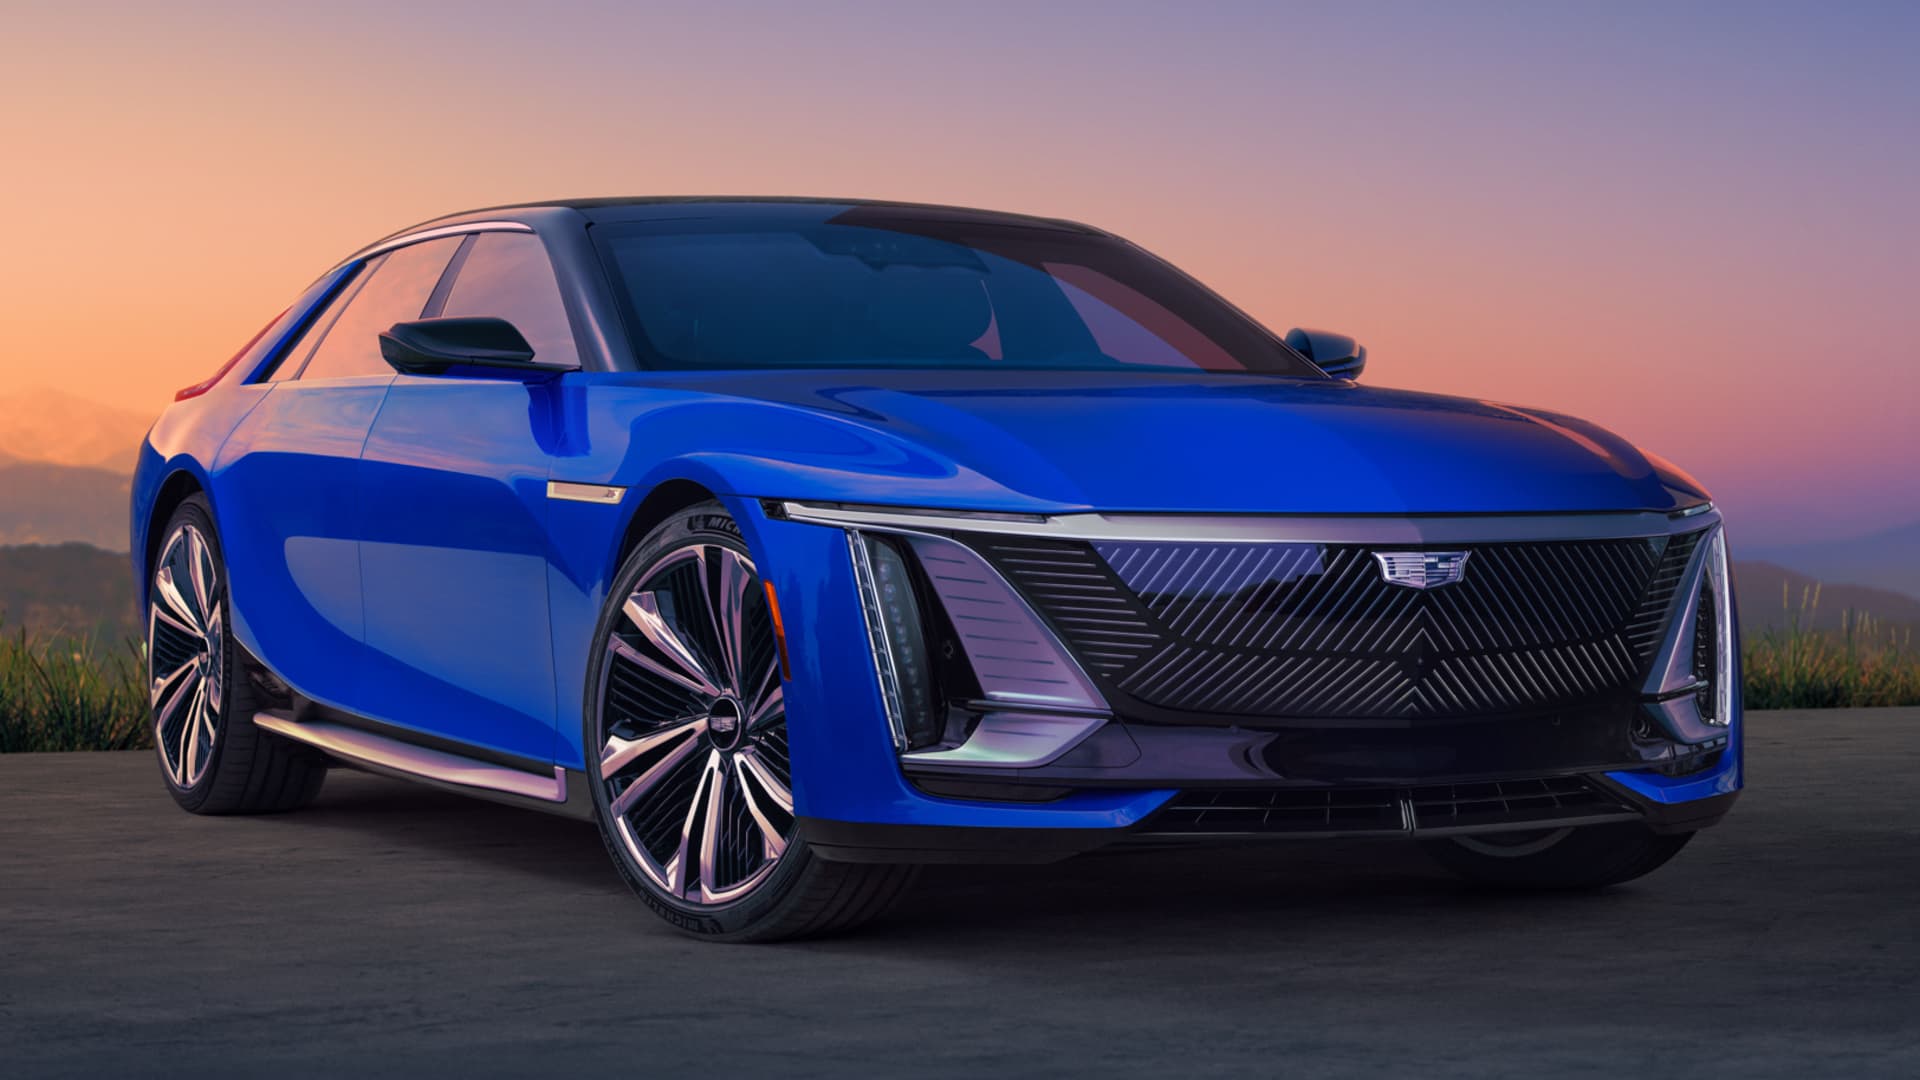 GM tests limits of Cadillac’s brand power with $300,000 Celestiq electric car Auto Recent